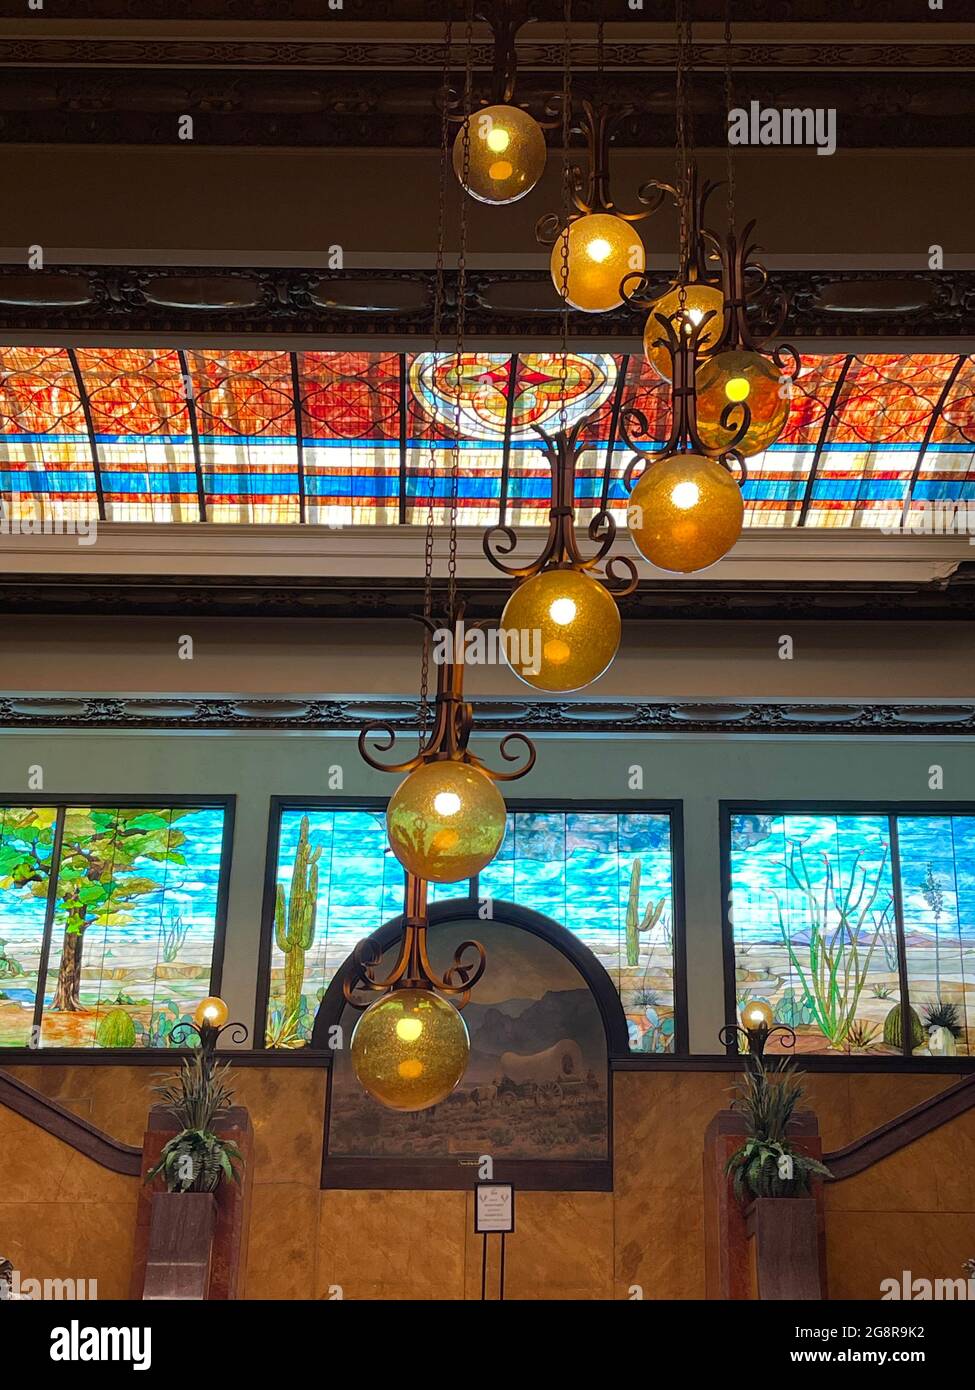 The majestic lobby stained-glass mural and art-deco lighting inside the Gadsden hotel in downtown Douglas, Arizona Stock Photo